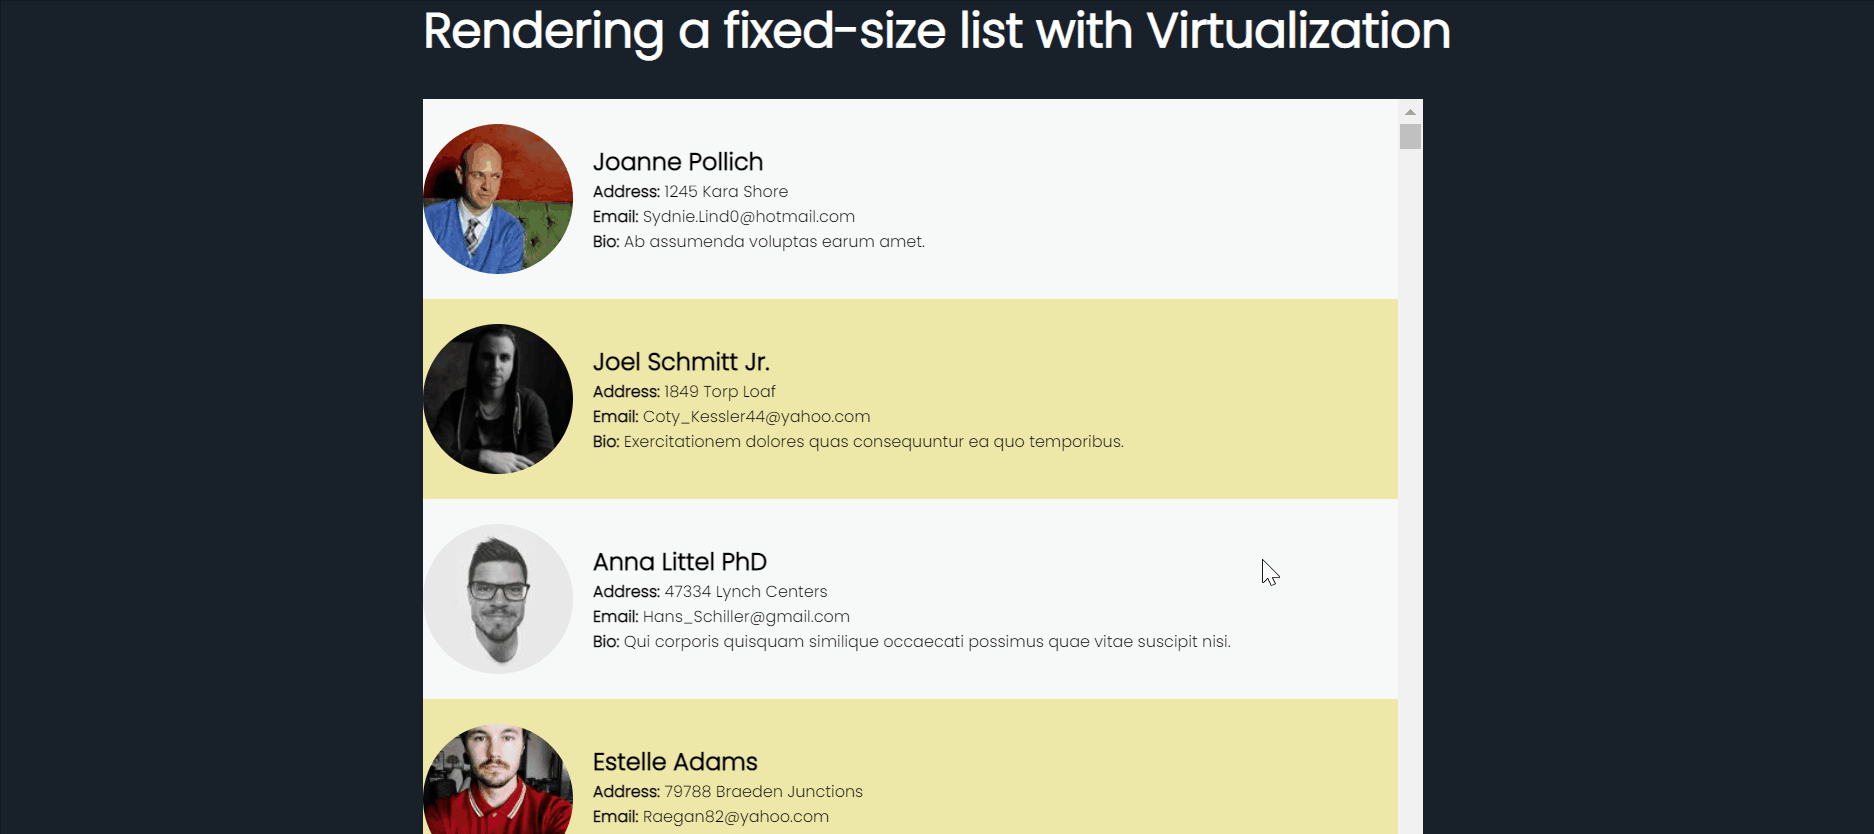 Rendering a fixed-size list with virtualization